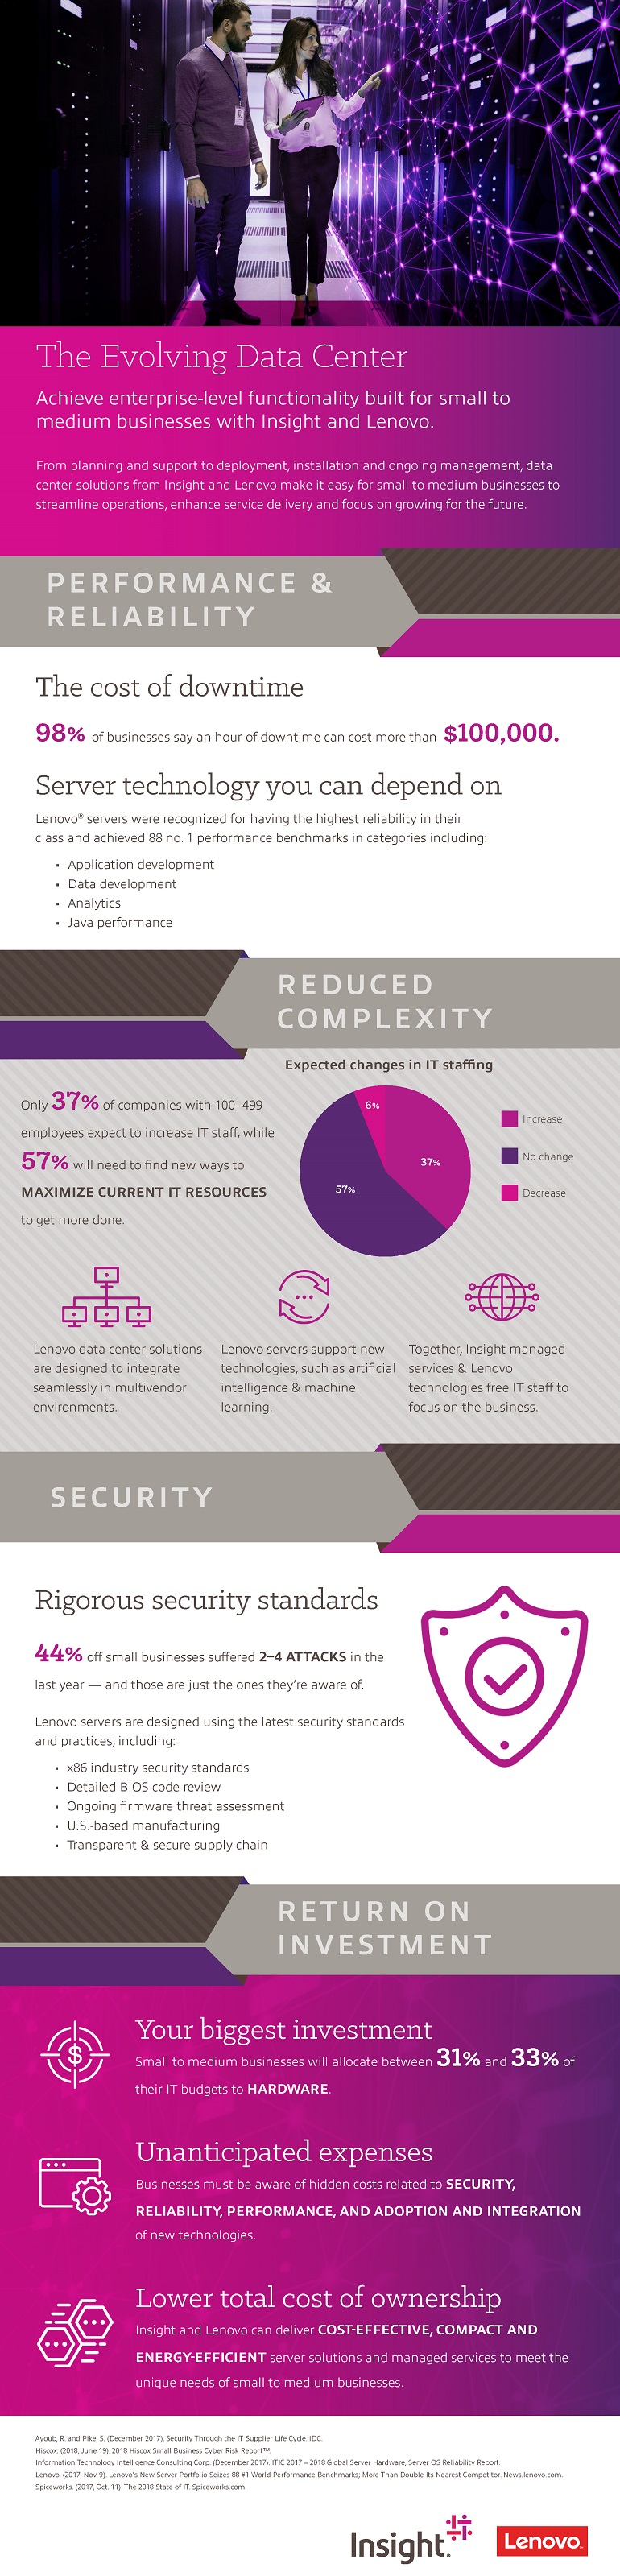 Article Infographic: The Evolving Data Center Image